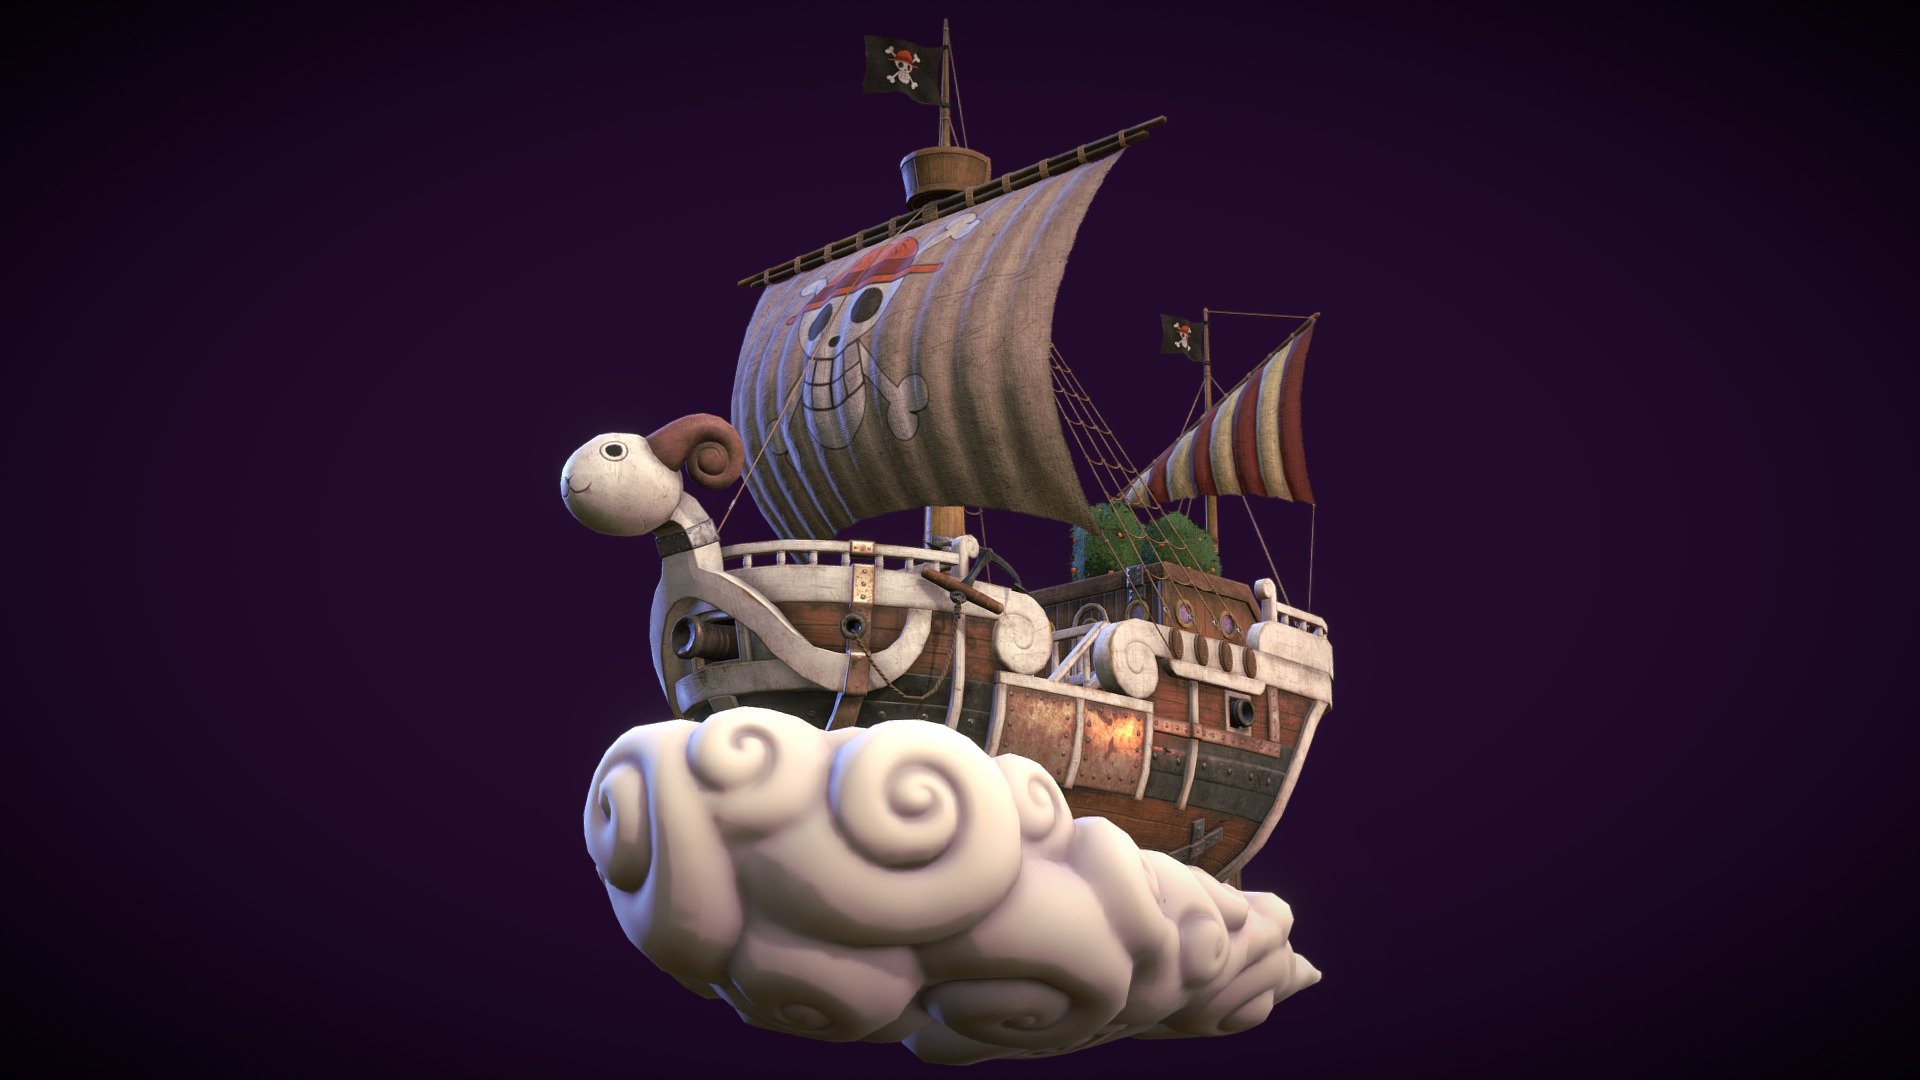 My fanart of Going Merry, a small ship with beautiful and sad story. Here I tried to create a low-poly model with saving maximum details.

Used software: Blender, Marmoset Toolbag, Substance 3D Painter 3d model